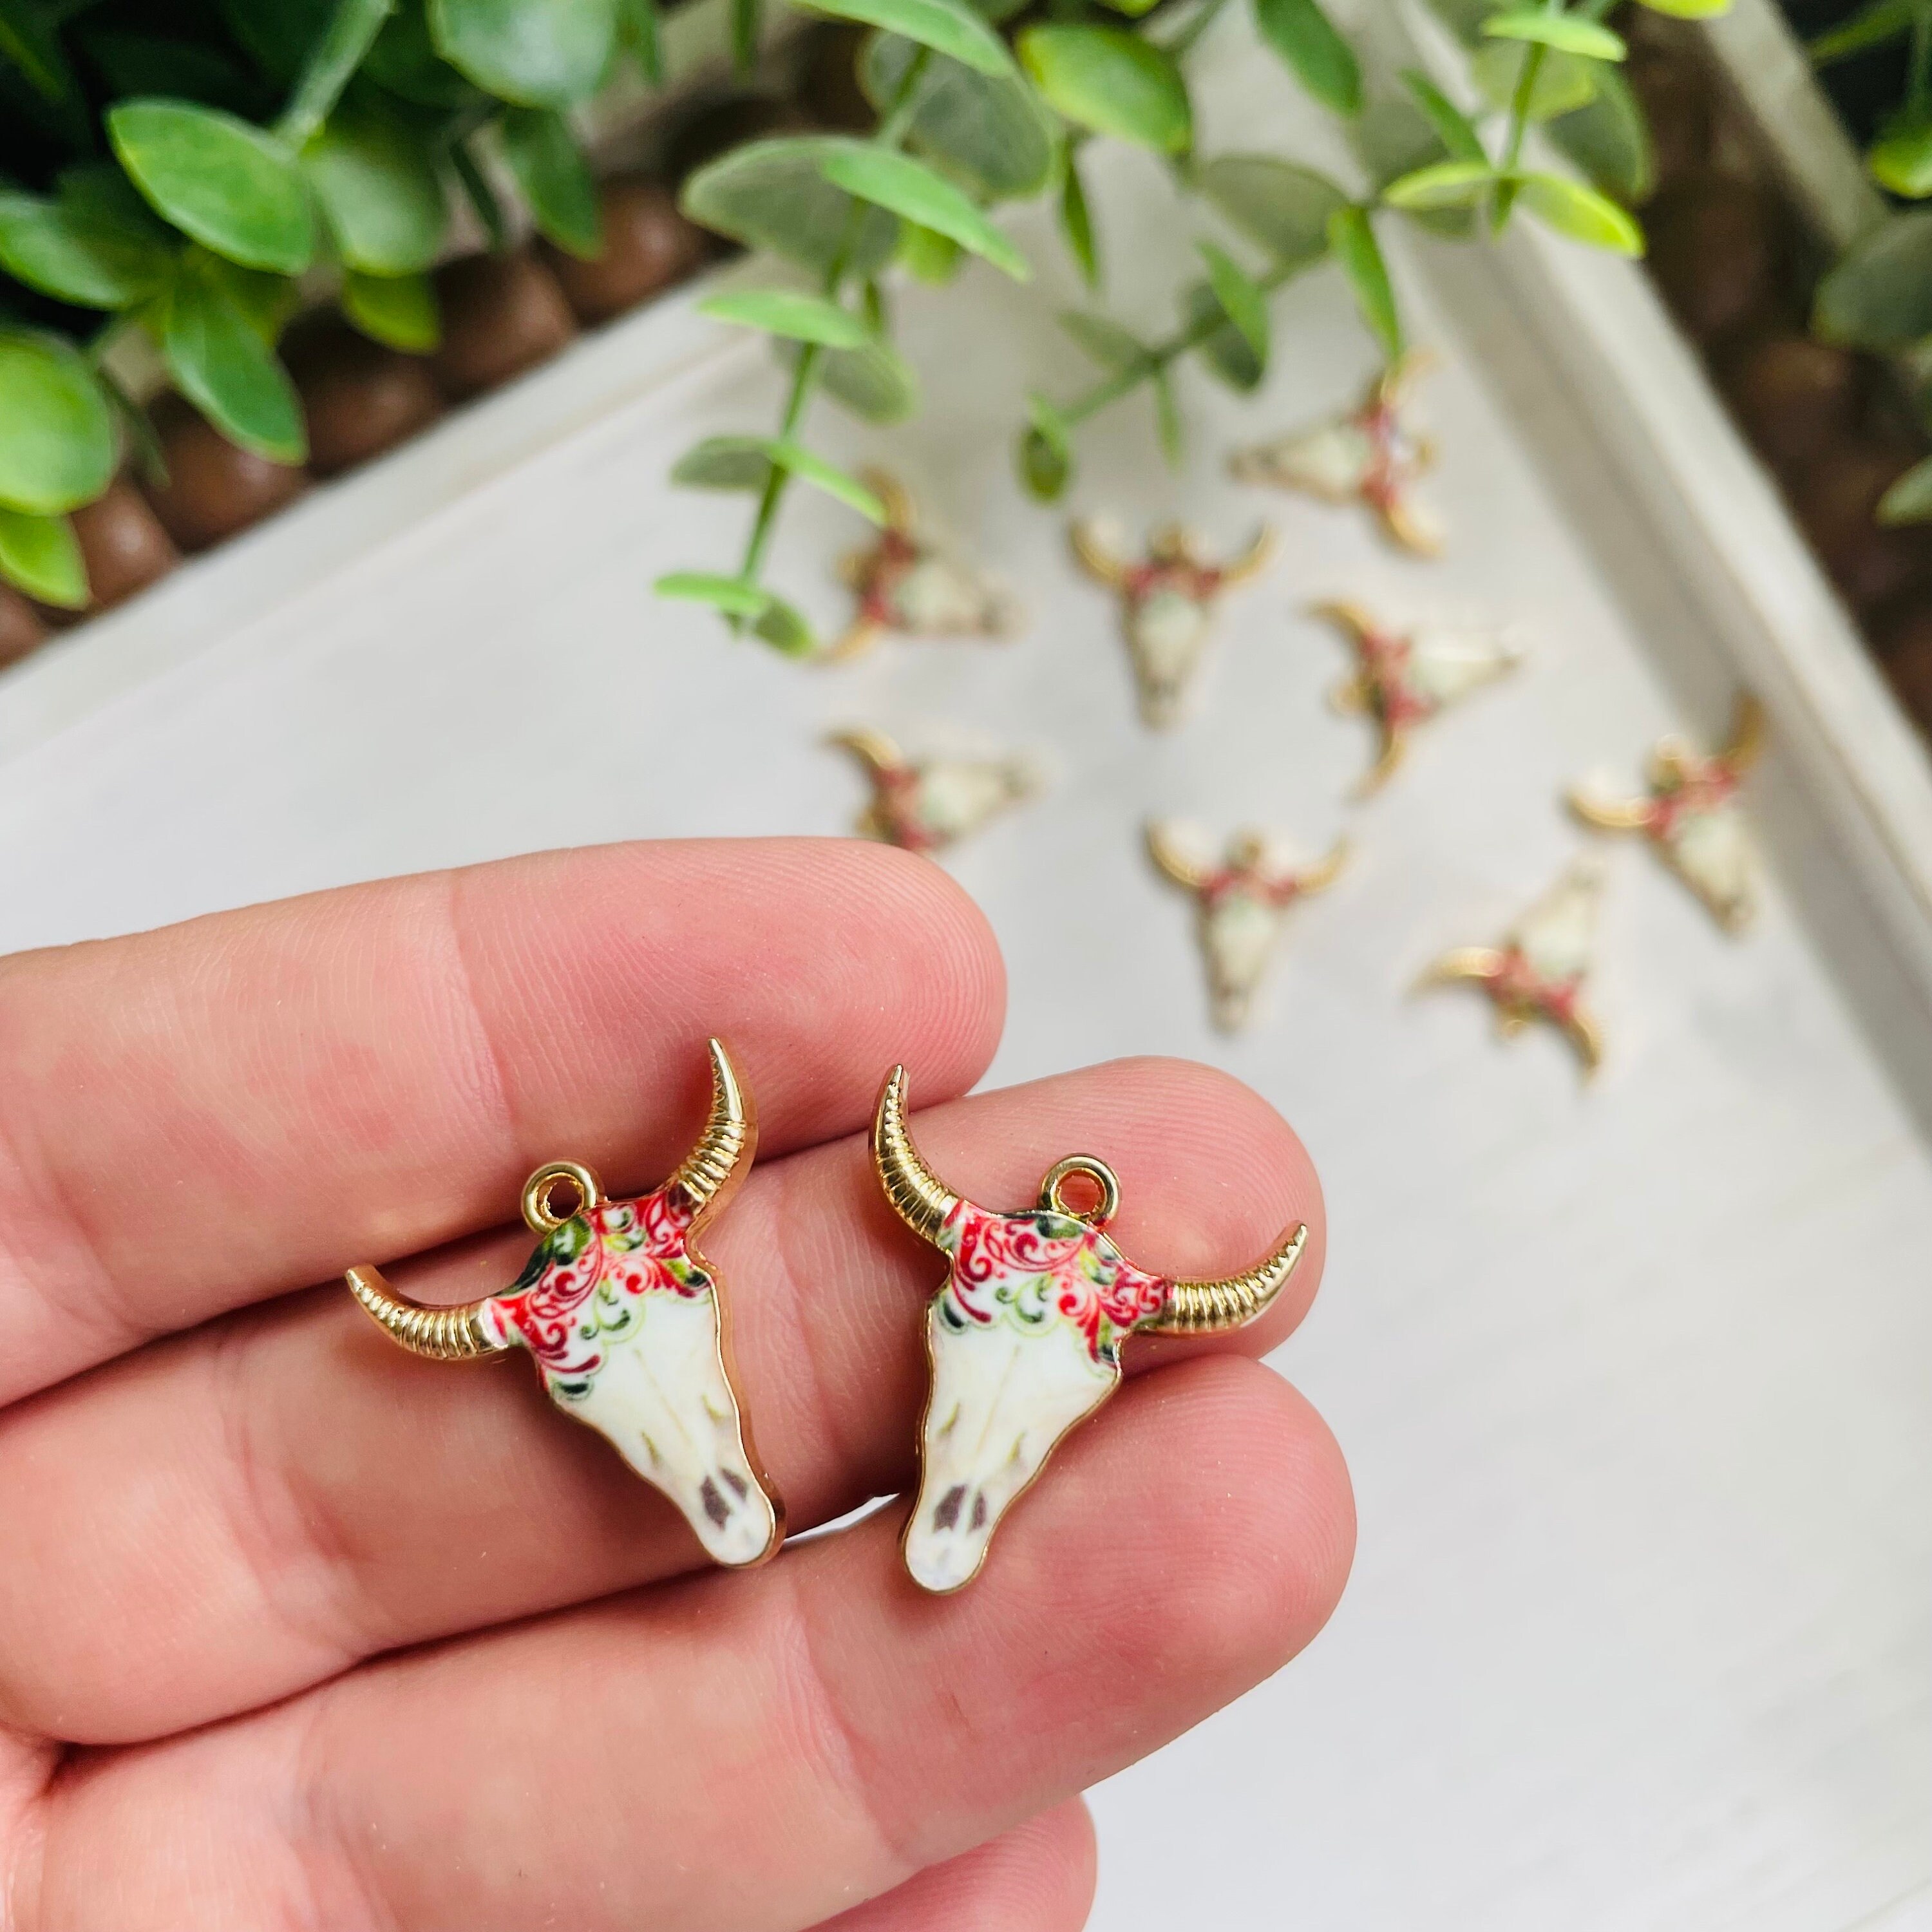 10/15/20pcs Silver Cowboy Hat Charms/ Western Charms/Cowboy Jewelry/ Cowboy Hat Pendant/ Cowboy/ Western/ Jewelry Making Supplies